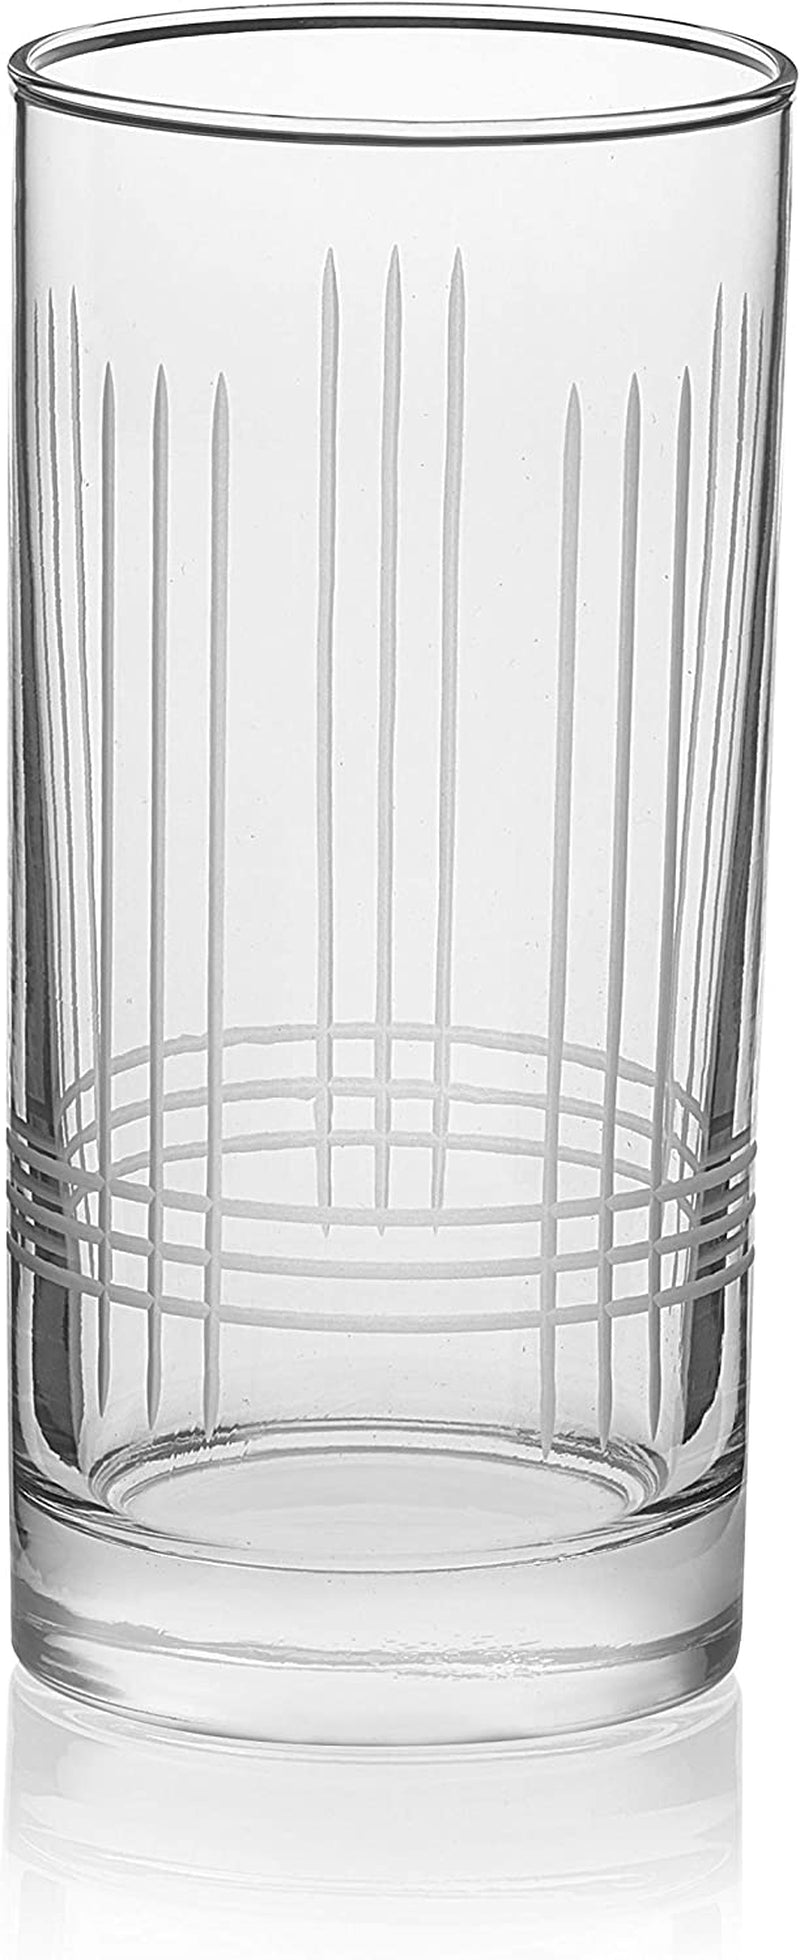 Libbey Cut Cocktails Scribe Tumbler Glasses, 15-Ounce, Set of 8 Home & Garden > Kitchen & Dining > Tableware > Drinkware Libbey   